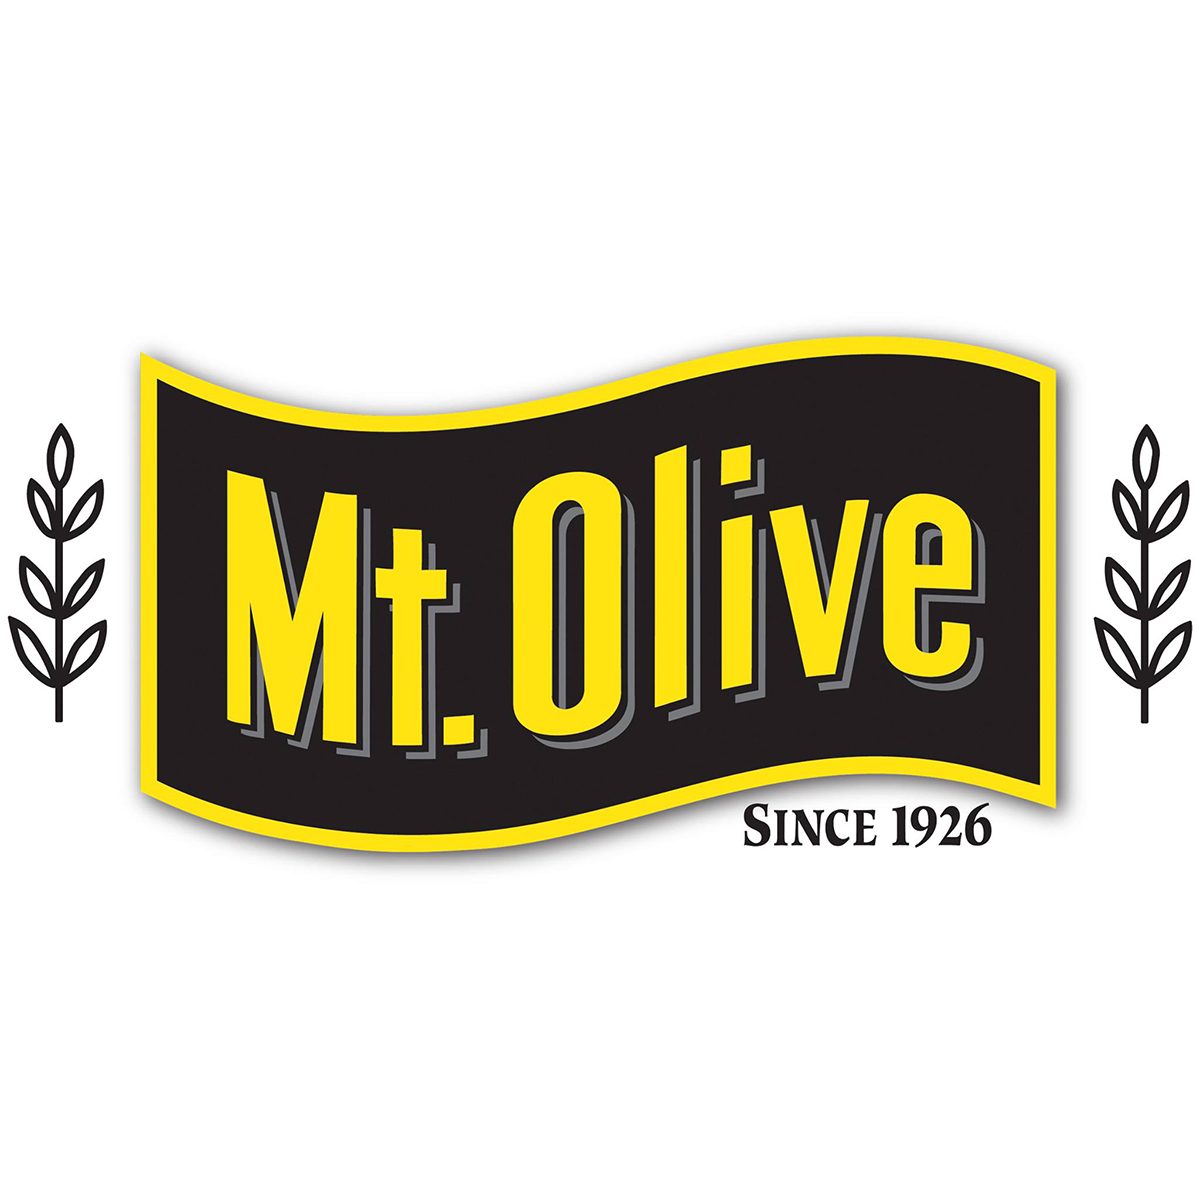 <p><strong><a class="SWhtmlLink" href="https://www.mtolivepickles.com" rel="noopener">Mt. Olive Pickles</a>, Mount Olive</strong></p> <p>The Mt. Olive Pickle Company wasn't originally trying to make their own pickles—they just wanted to brine cucumbers and sell them to other companies. When that didn't work out, they started canning their own pickles and now they're one of the largest privately held pickle companies in the country.</p>